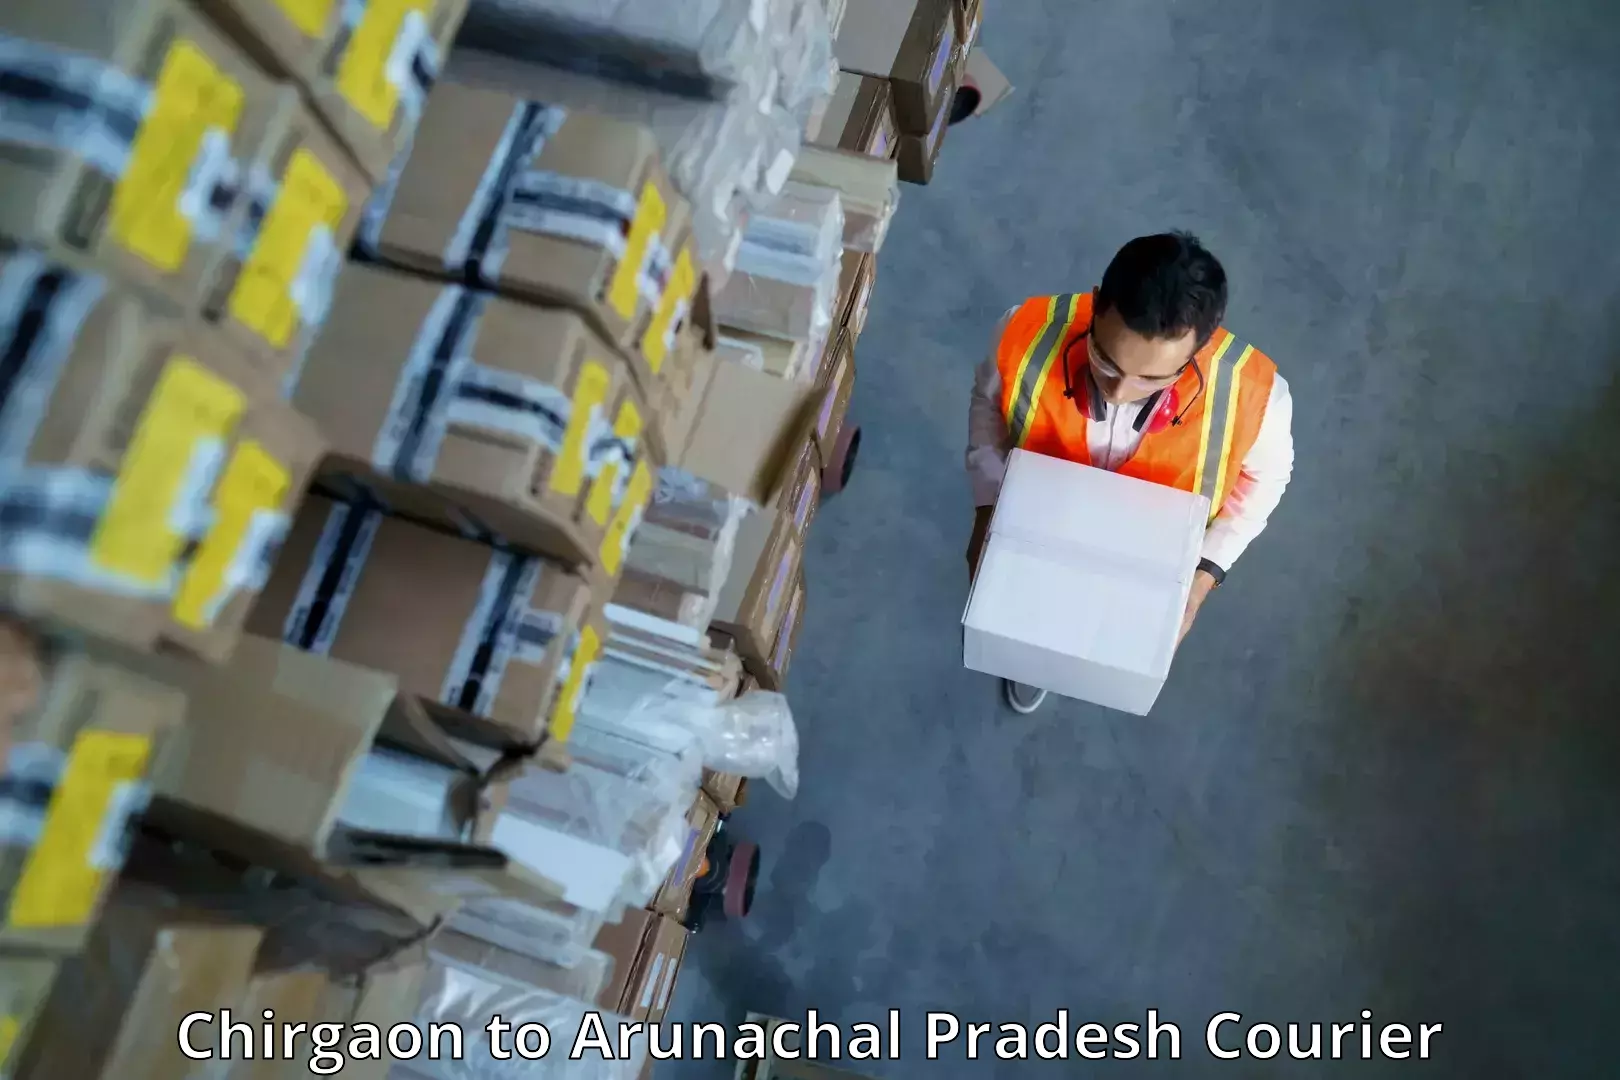 Pharmaceutical courier Chirgaon to Tezu